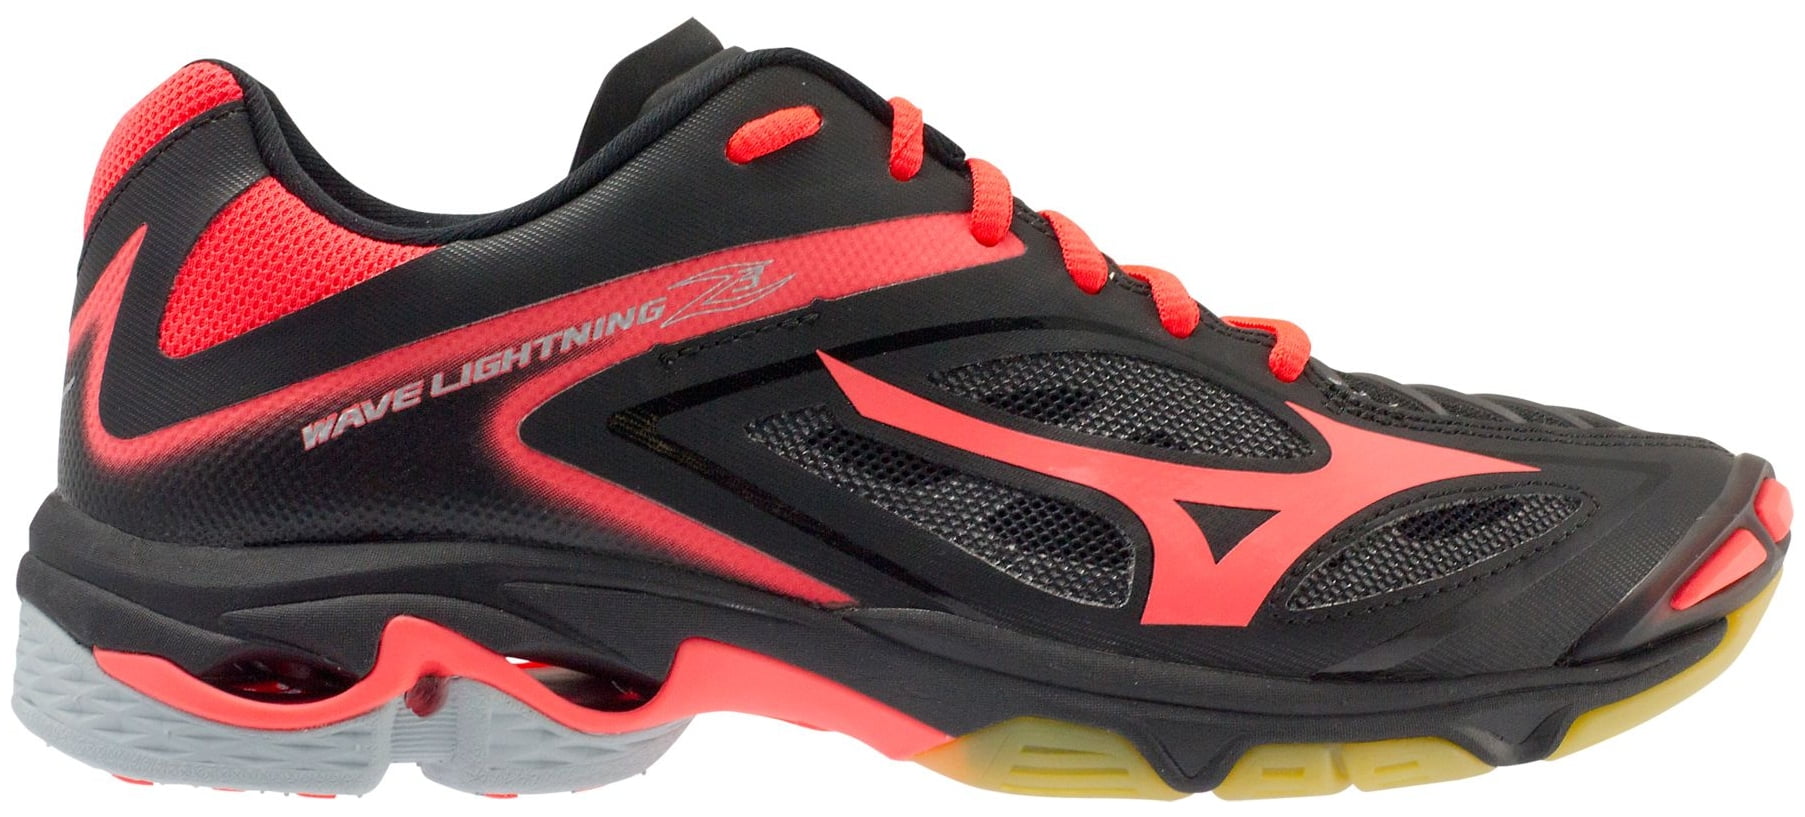 Mizuno Mens Wave Lightning Z3 Volleyball Shoes 